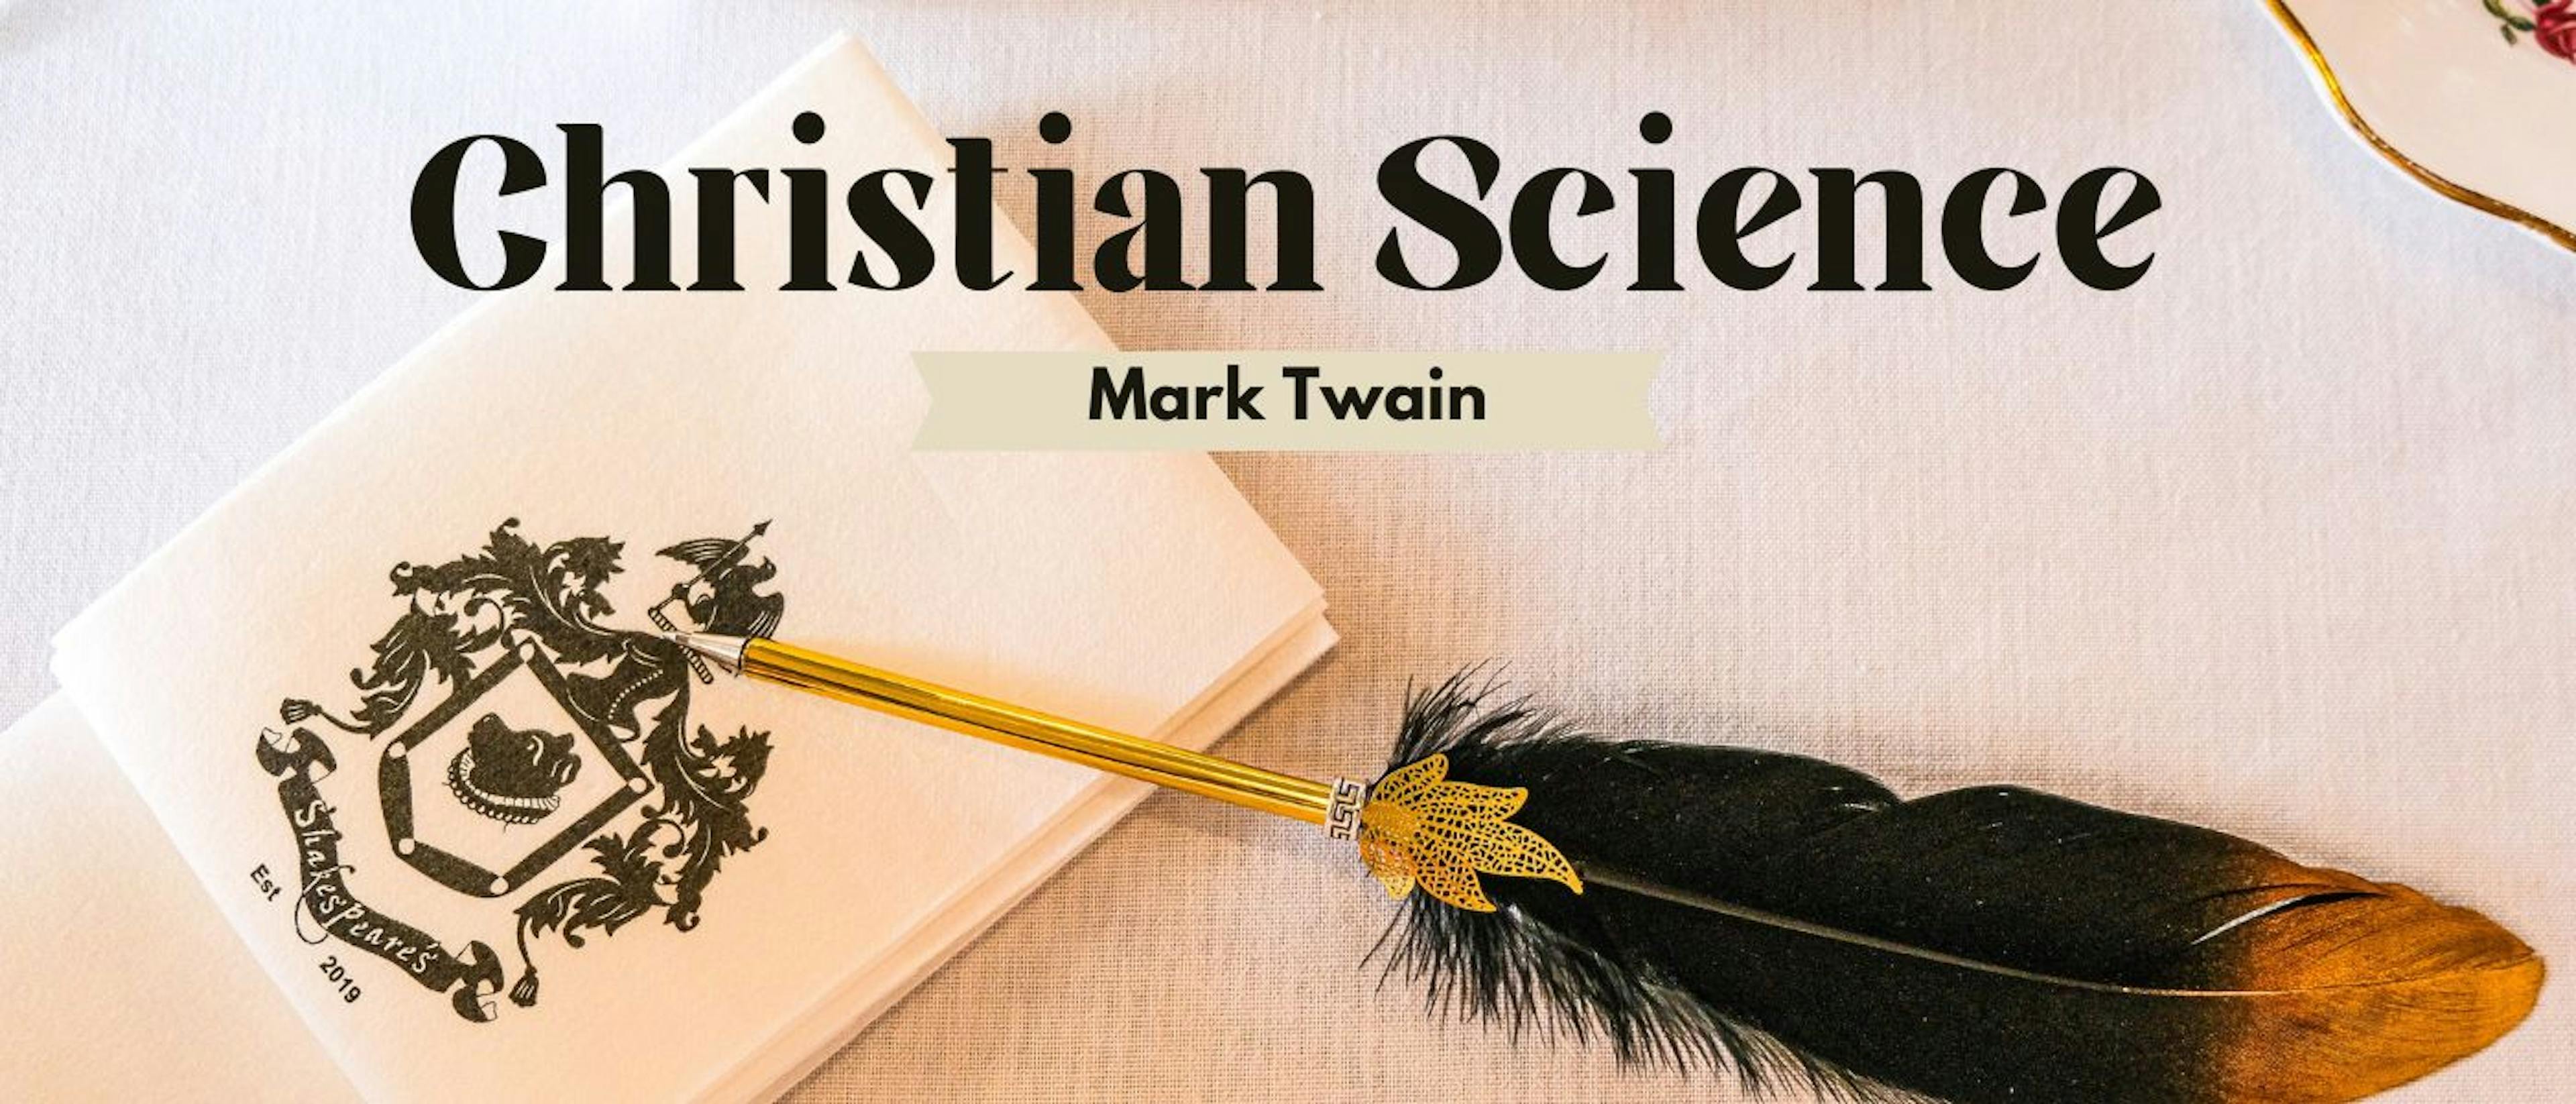 featured image - Christian Science by Mark Twain - Table of Links